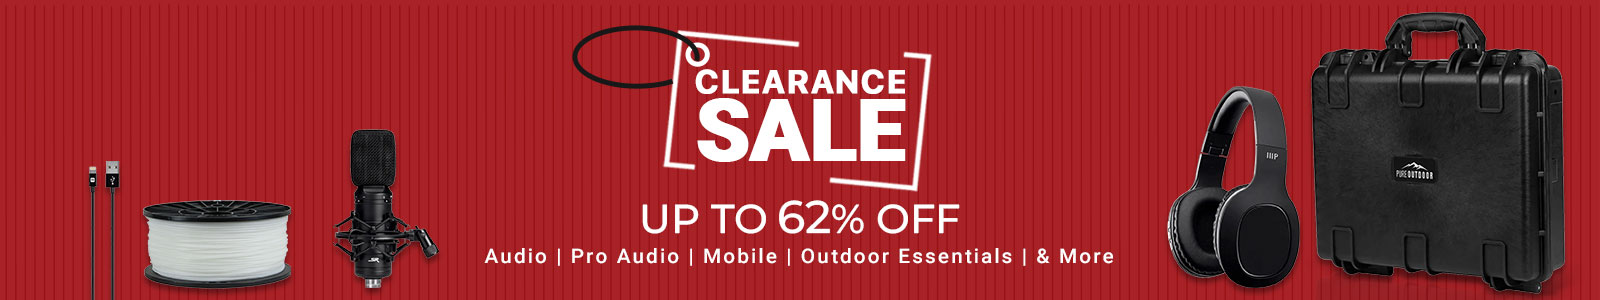 Clearance Sale
Up to 62% off
Audio | Pro Audio | Mobile | Outdoor Essentials |& More
Shop Now